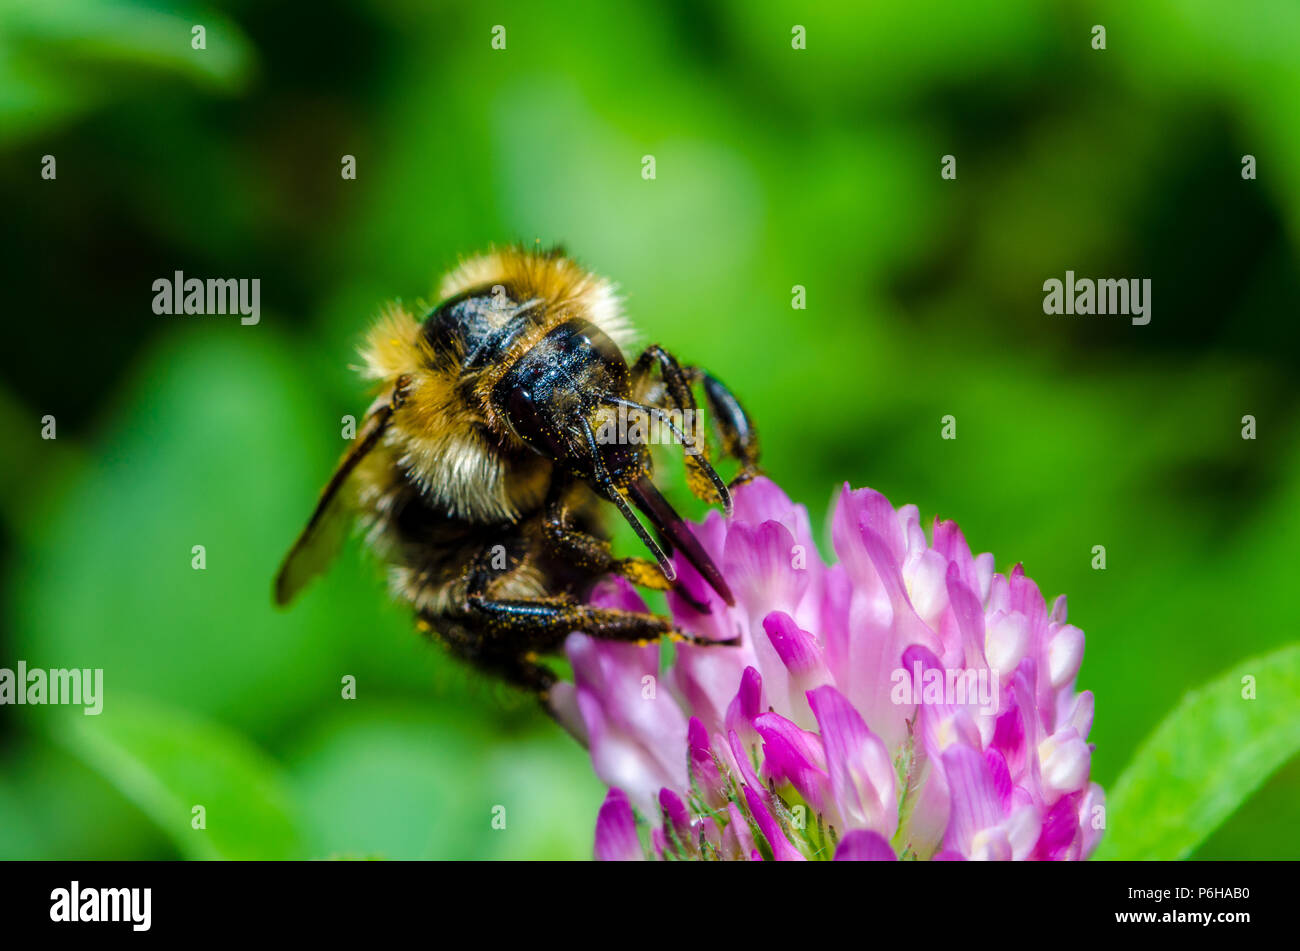 Bumblebee on a flower Stock Photo